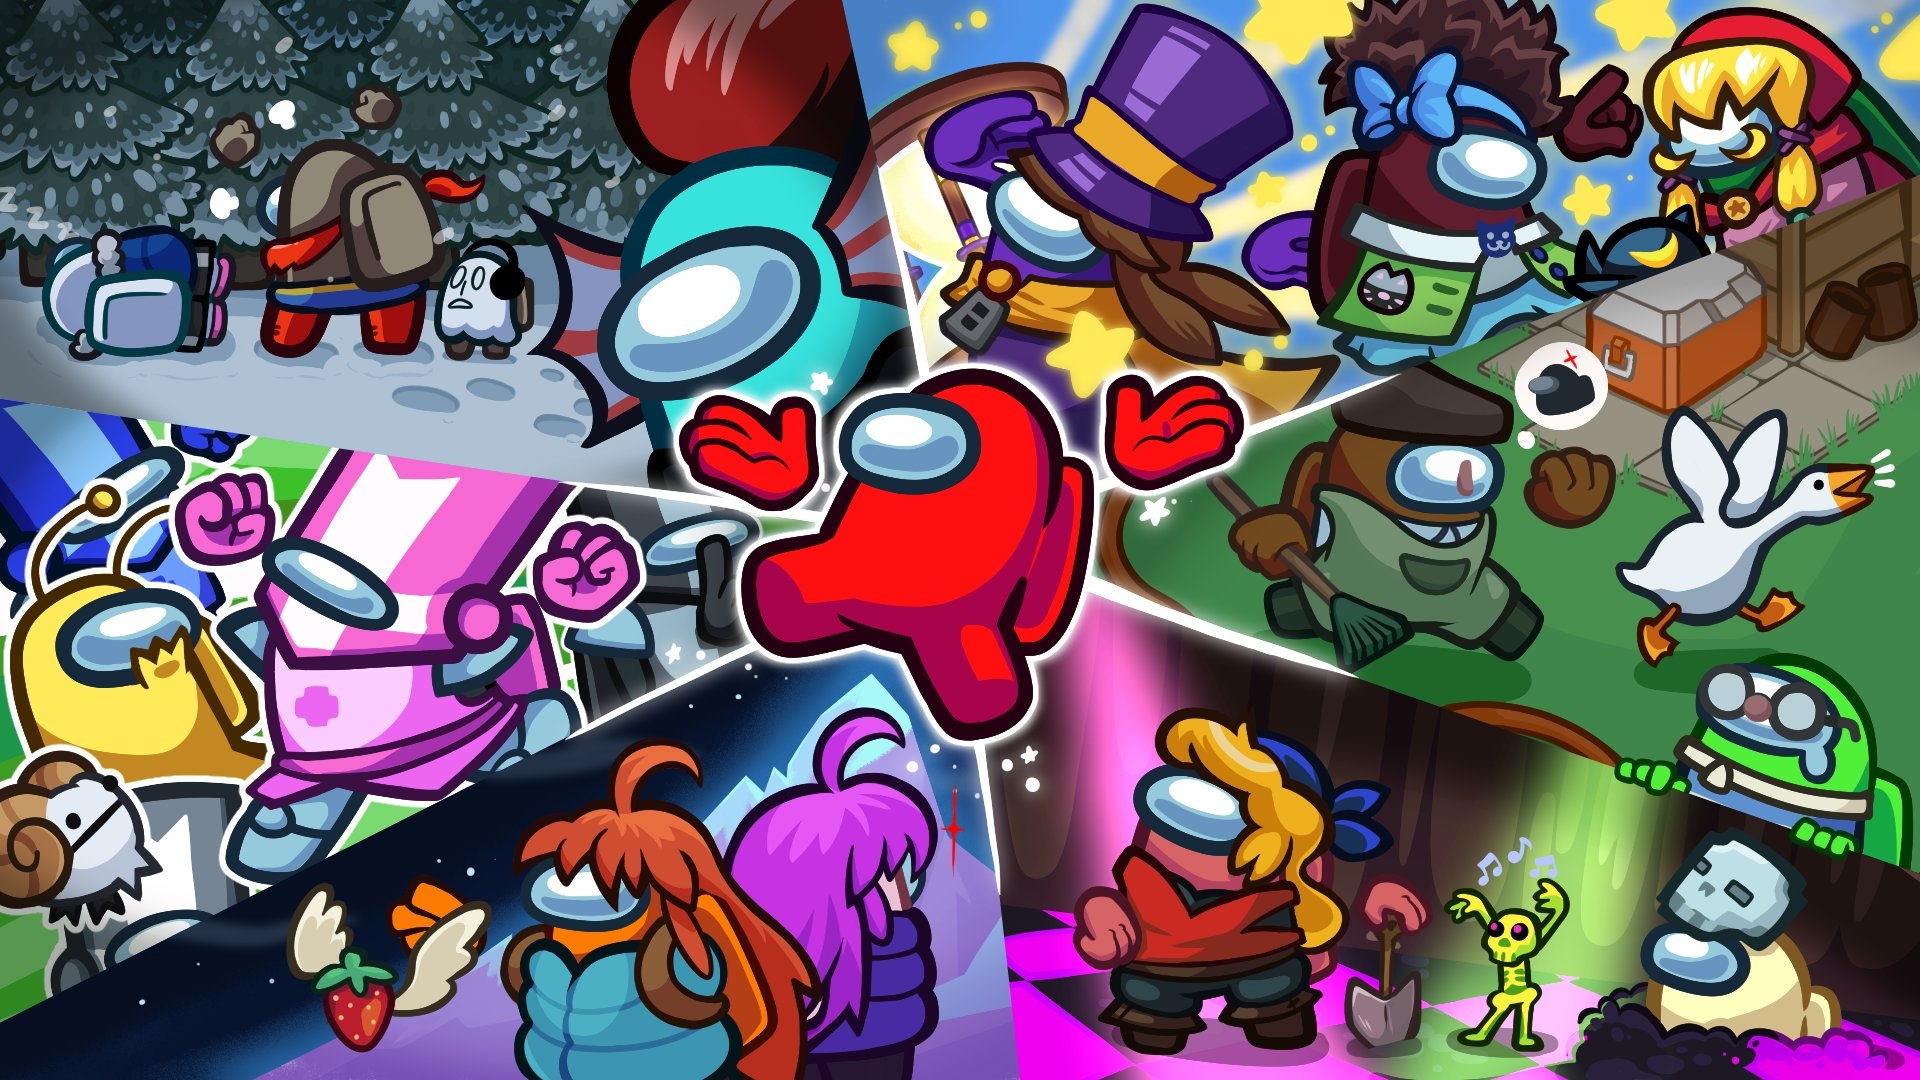 Best Android games: Among Us. Image shows a bunch of Crewmates dressed as different indie characters in a promotional image made for the game.